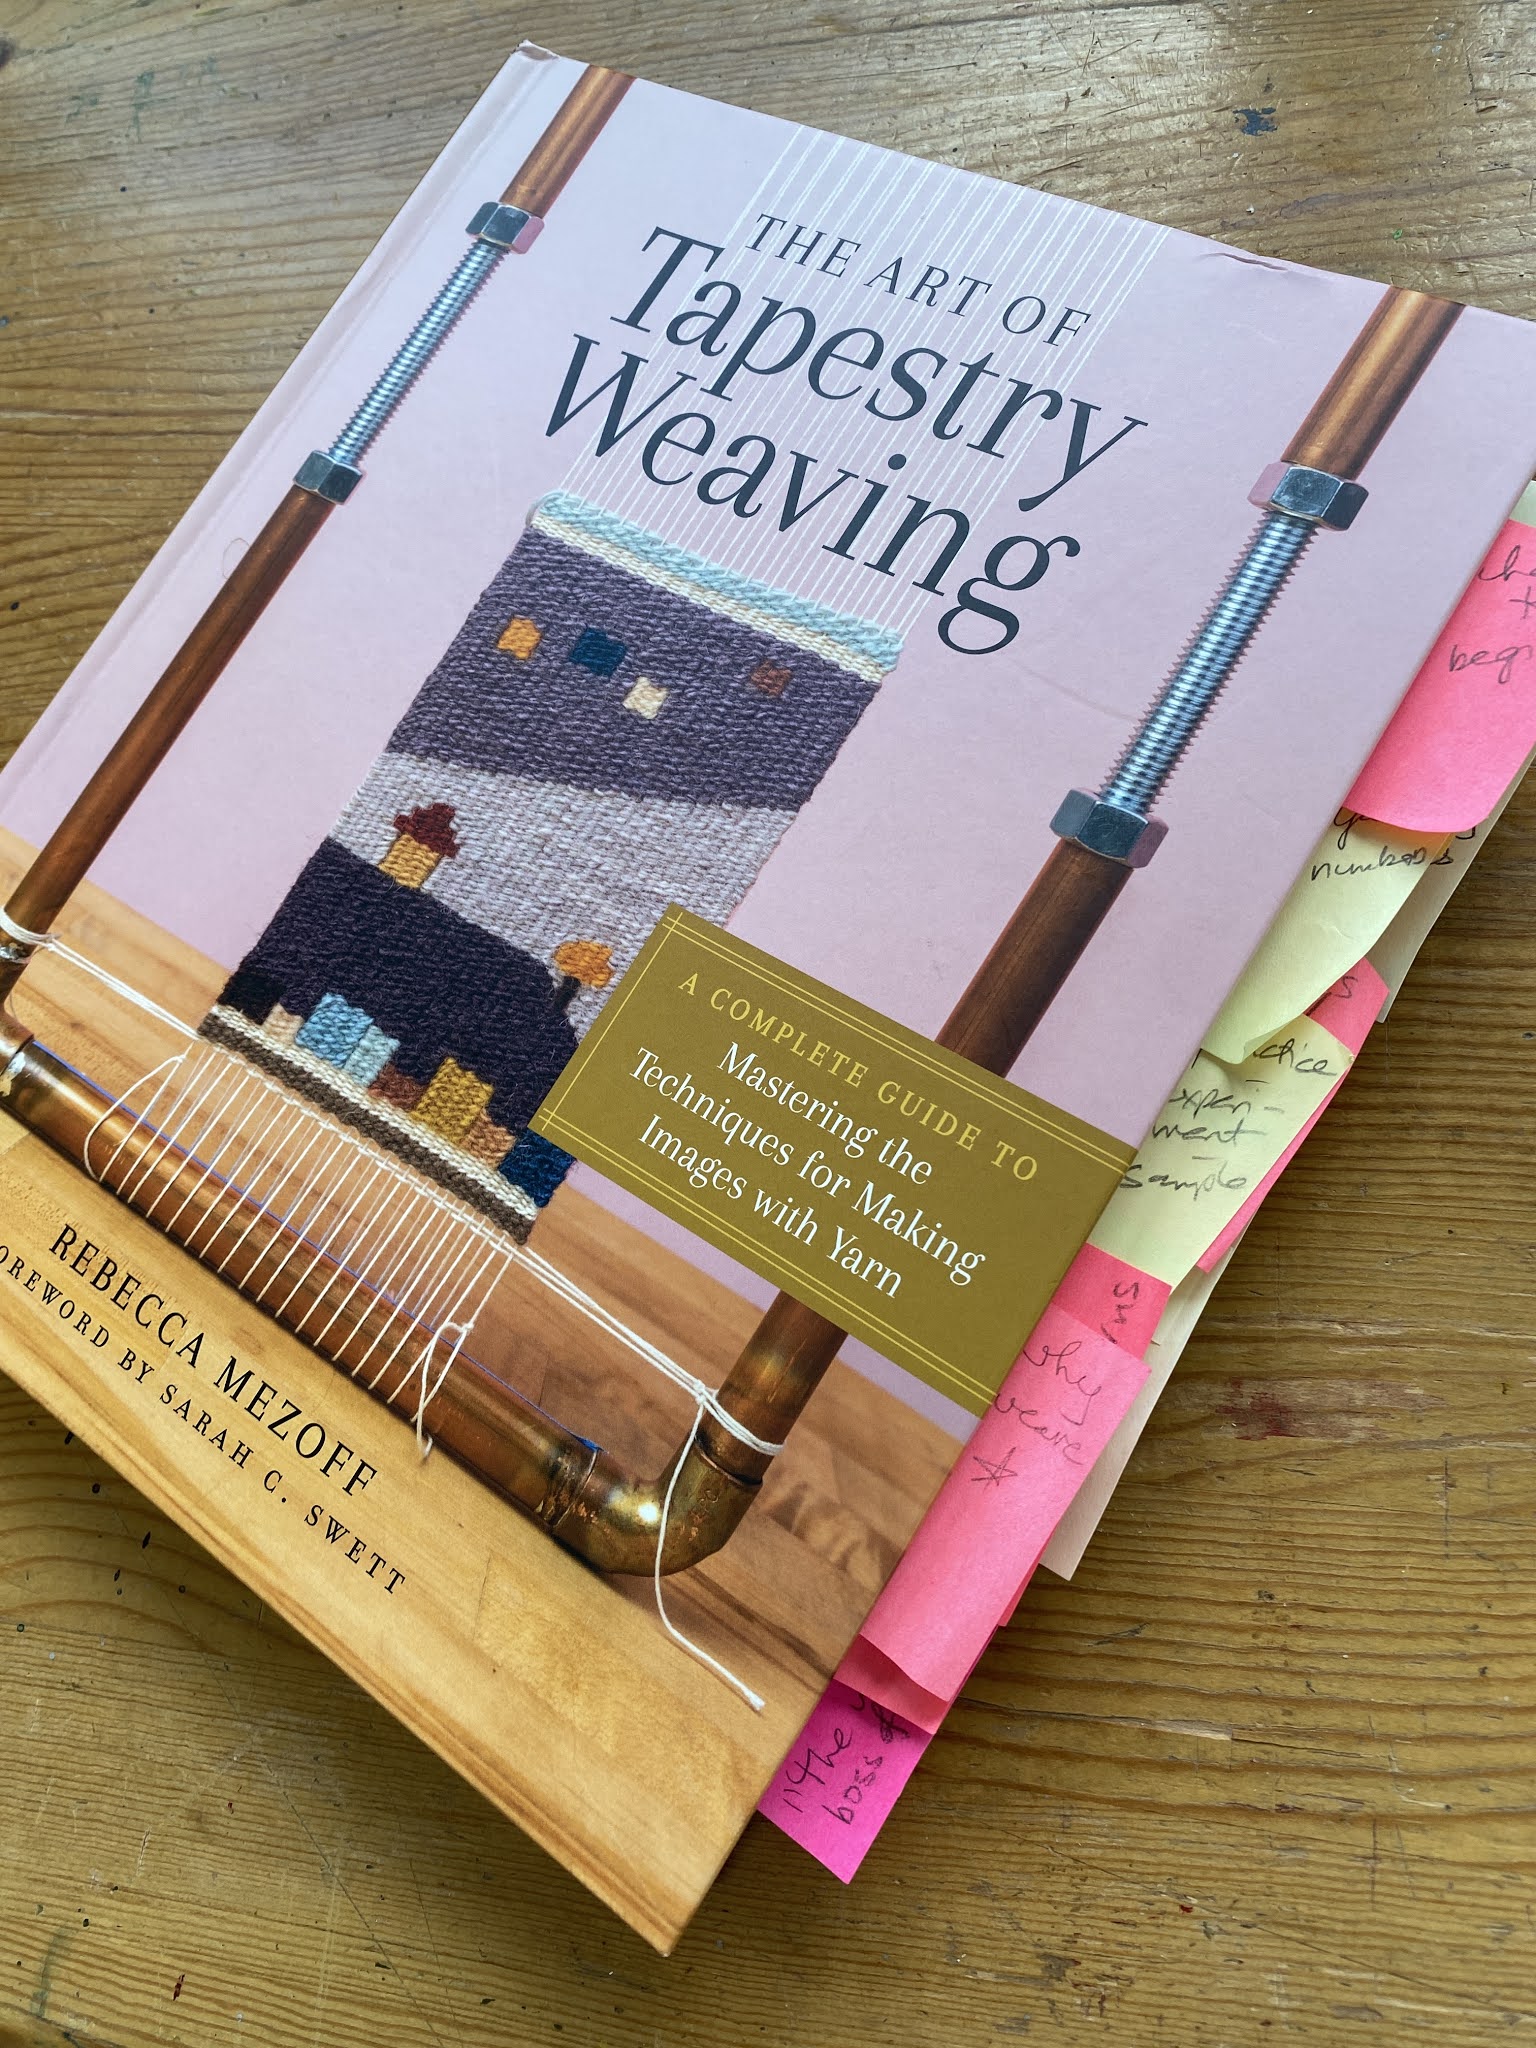 Introduction to Tapestry Weaving — Rebecca Mezoff